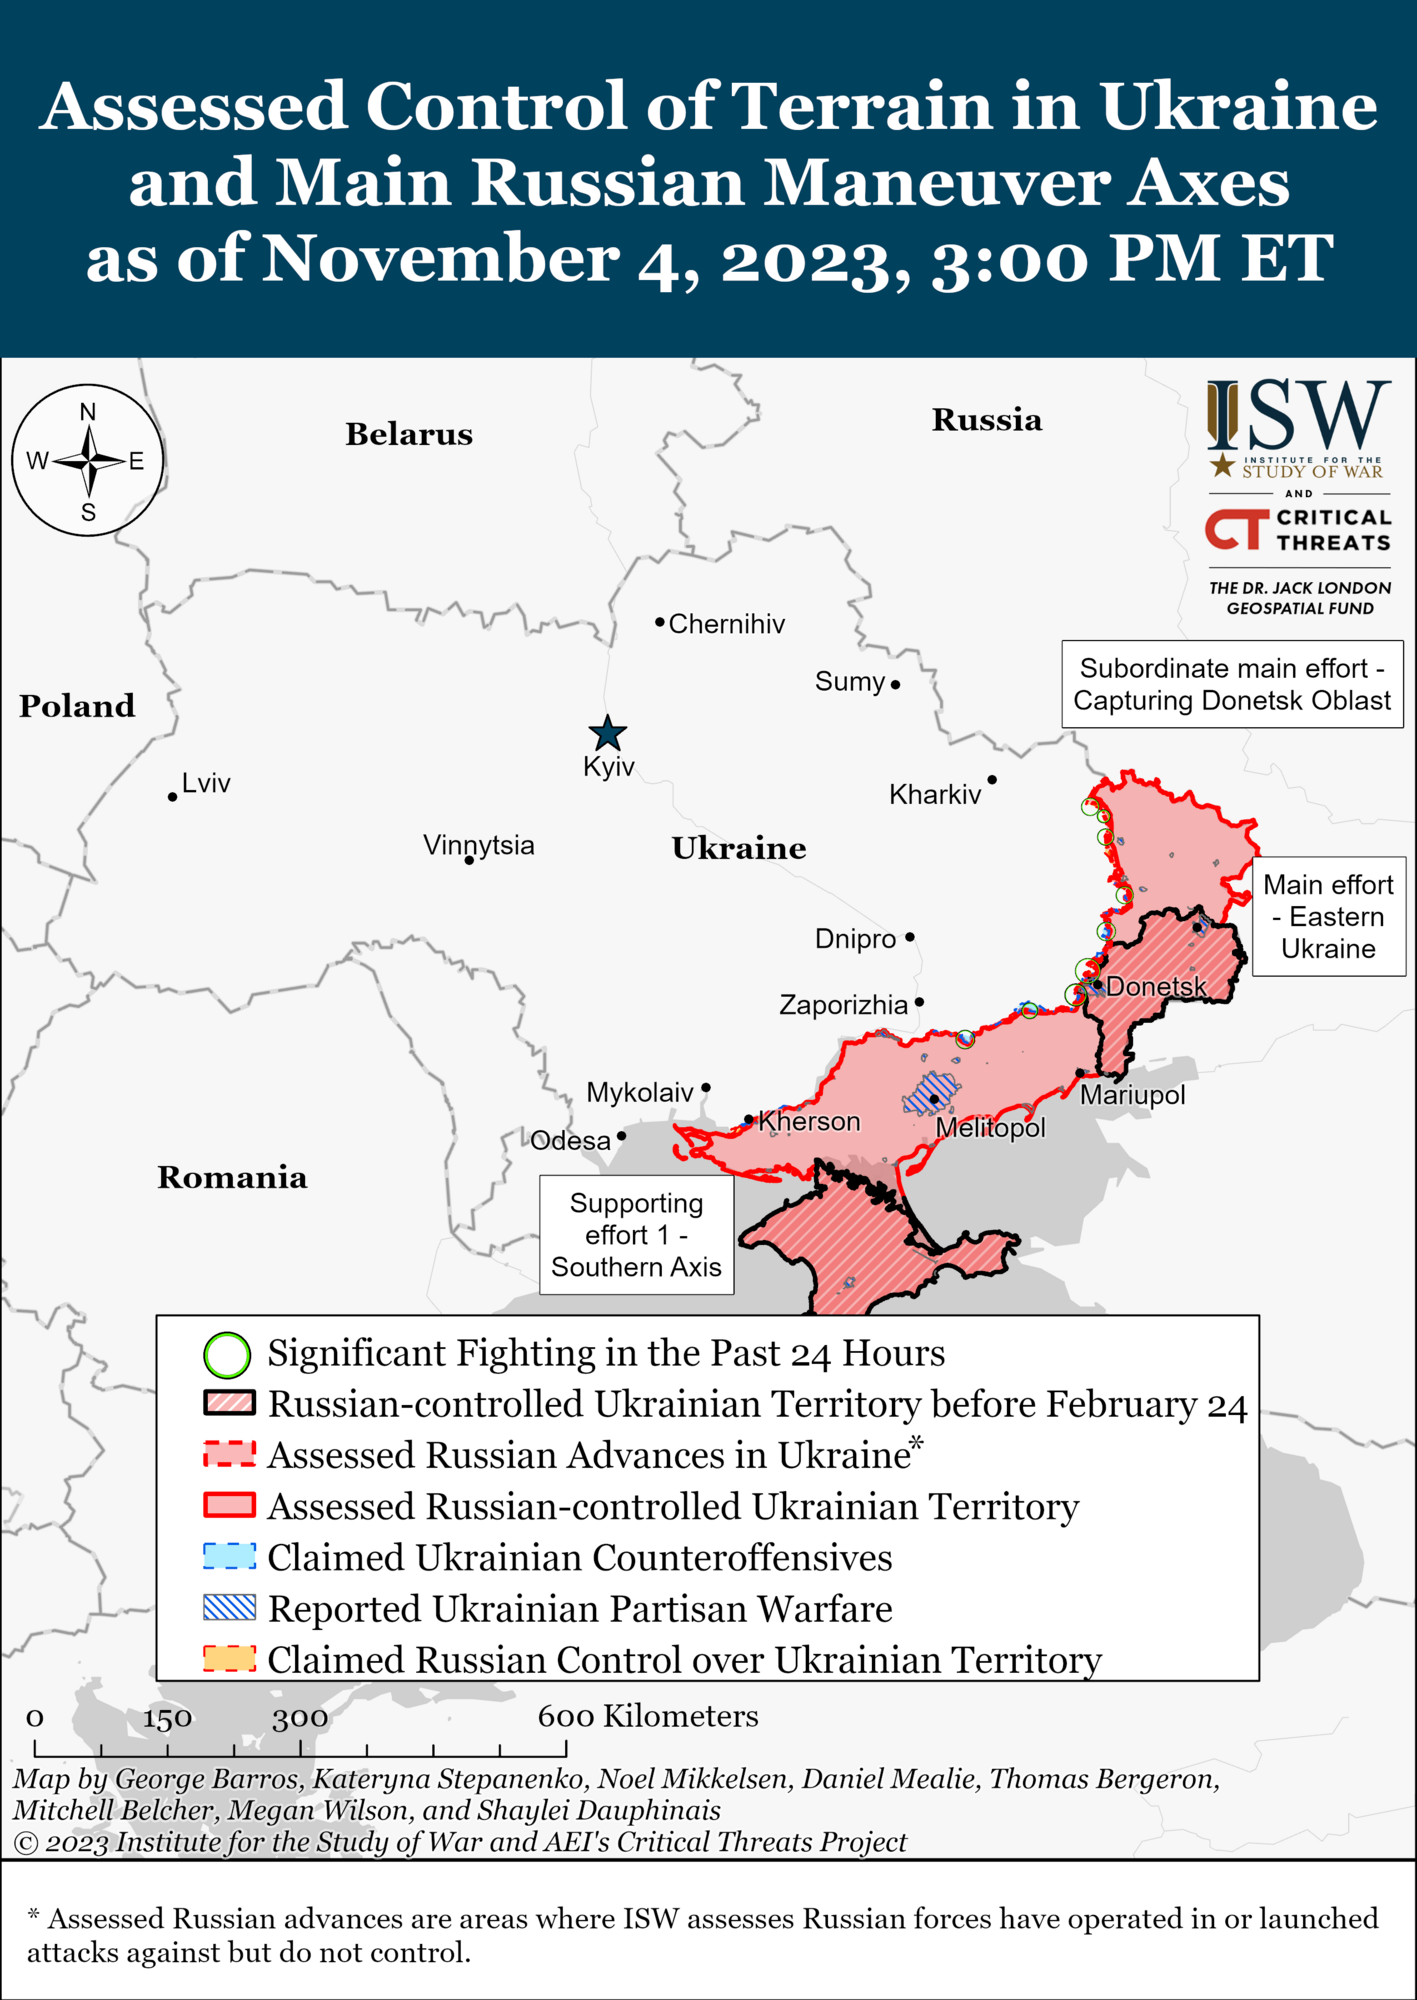 ISW: Putin believes in achieving goals on the battlefield and is not prepared to enter negotiations in good faith